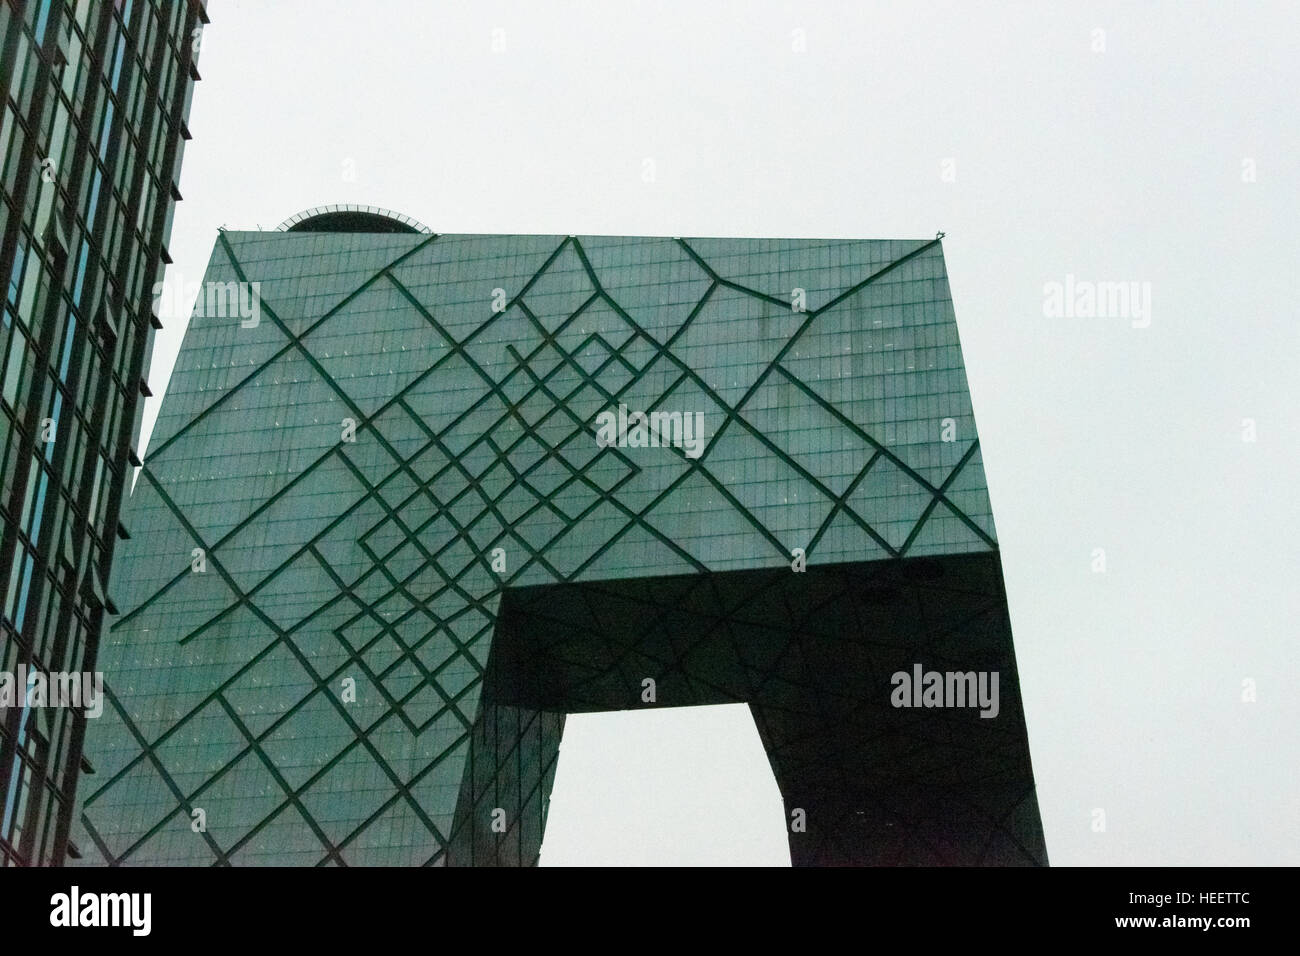 CCTV Headquarters and other high rises in CBD (Central Business District), Beijing, China Stock Photo